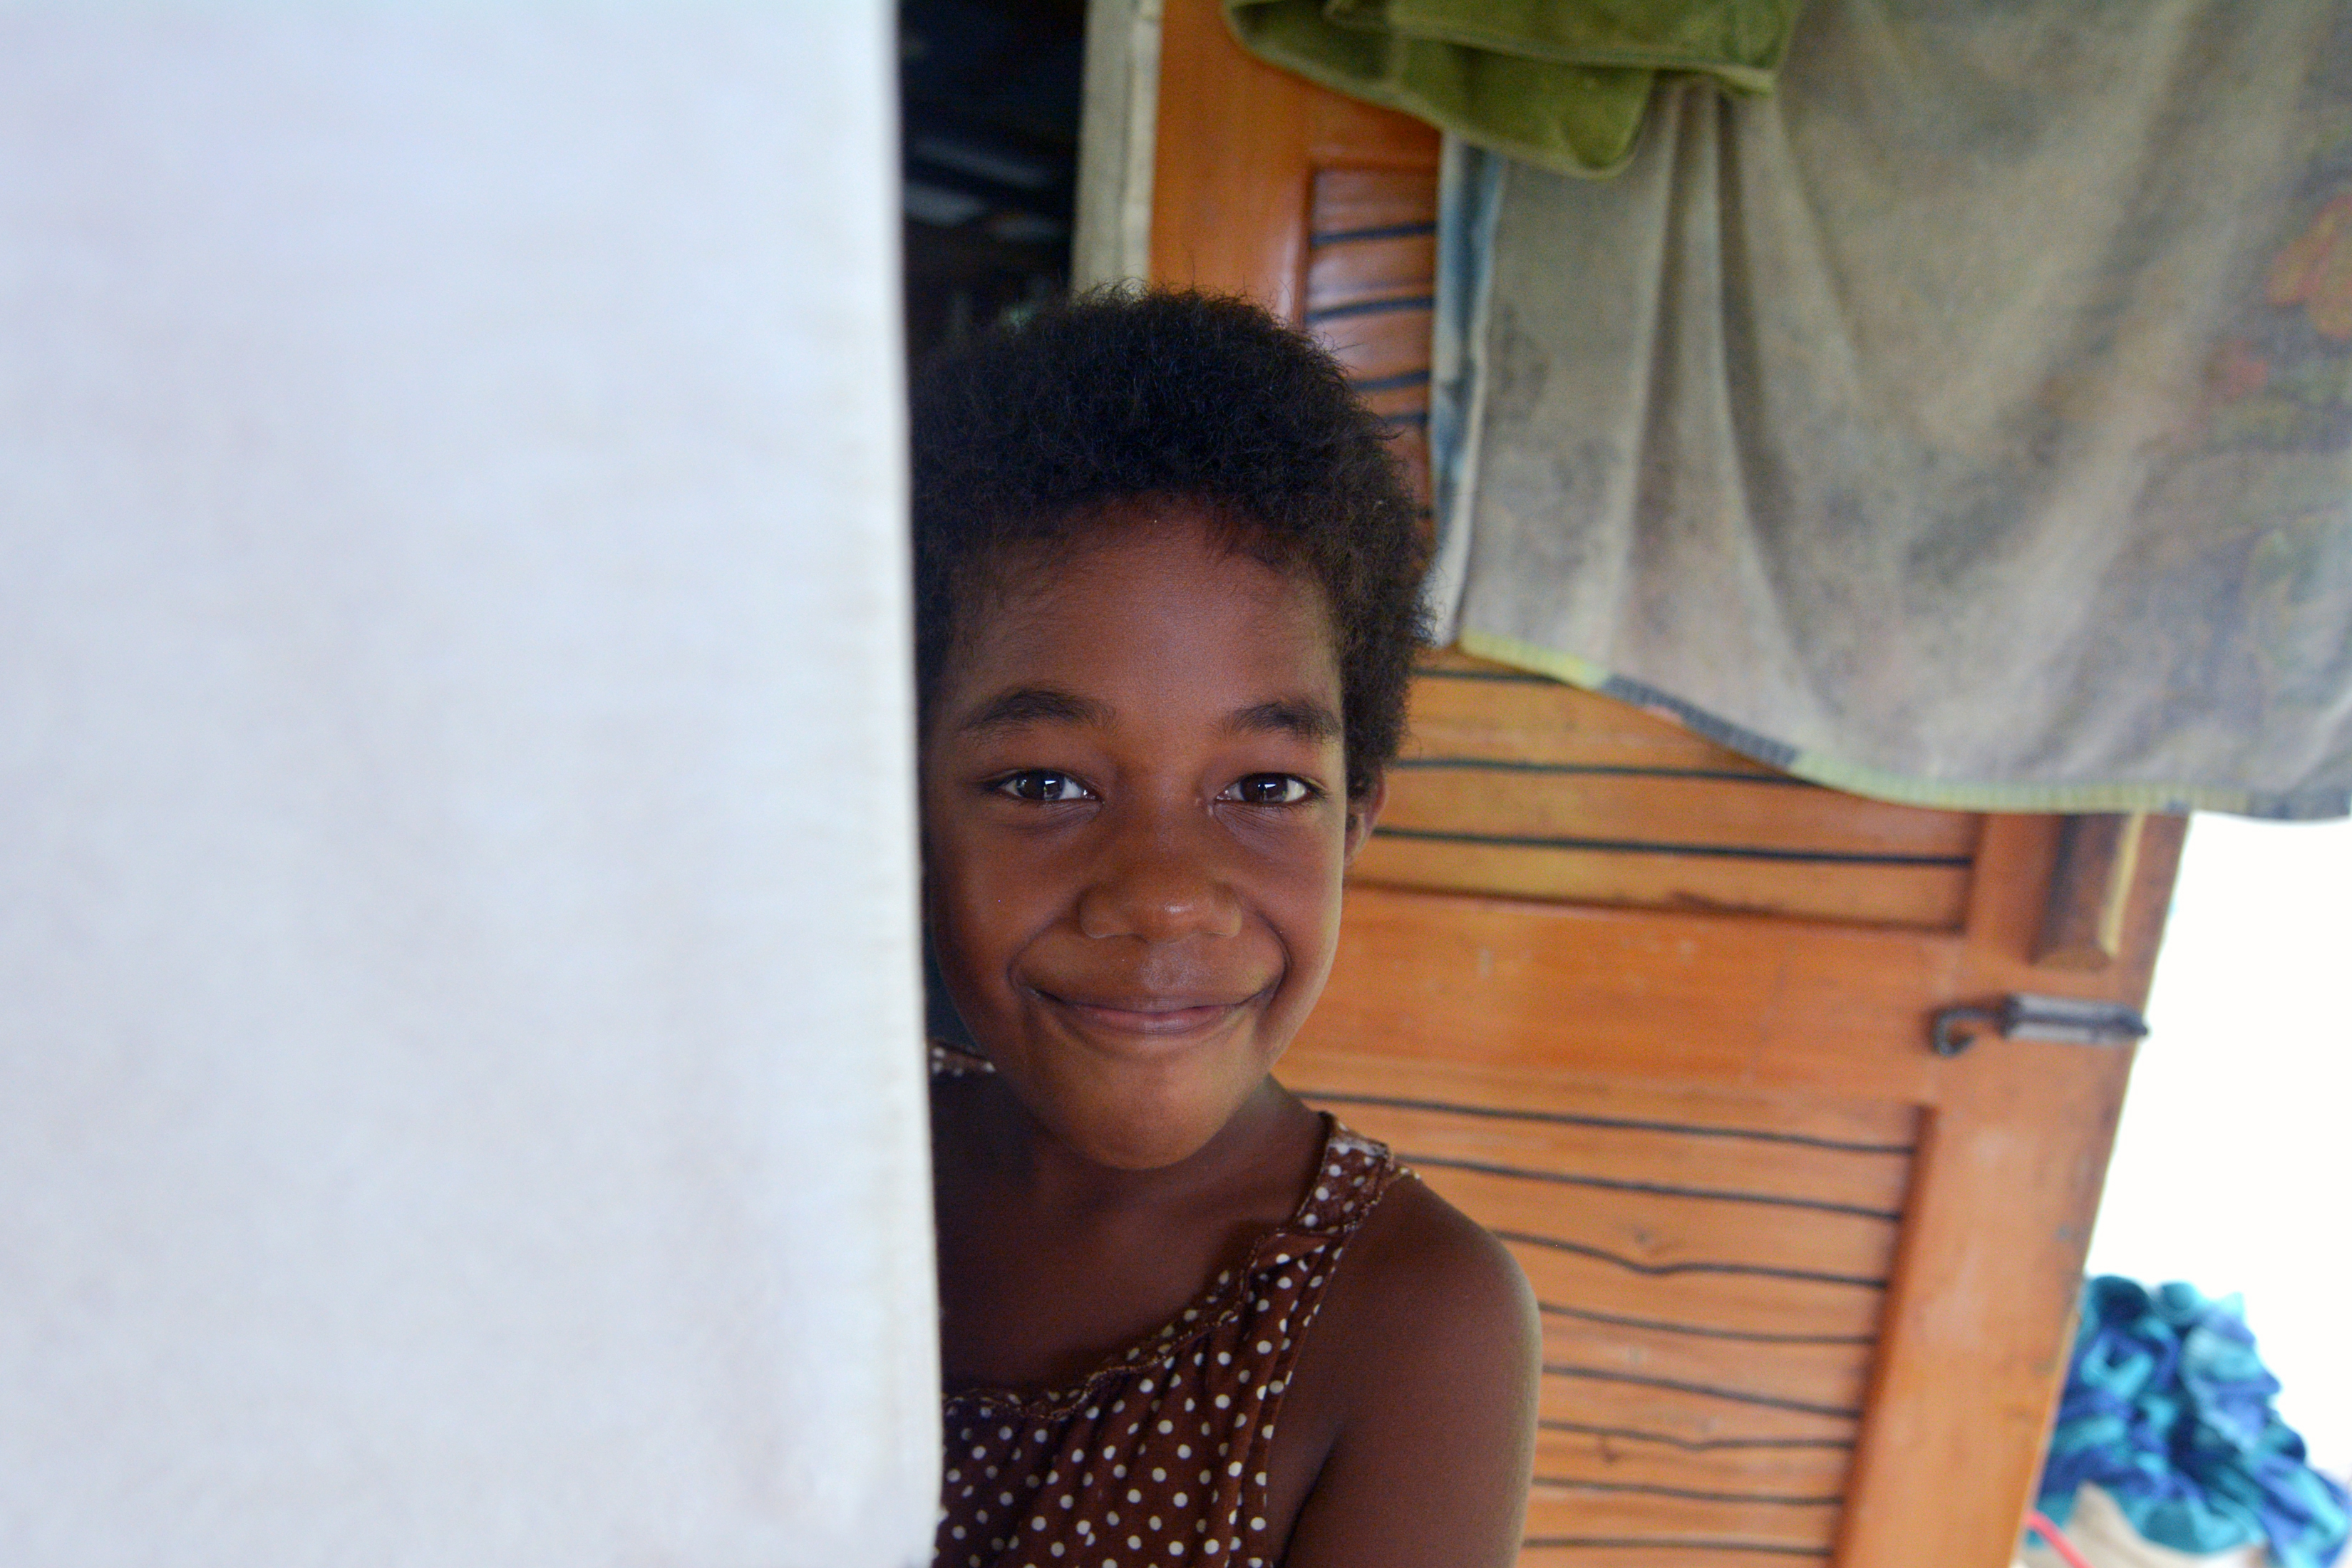 Fijian Girl (age 8) looks at the camera and smile